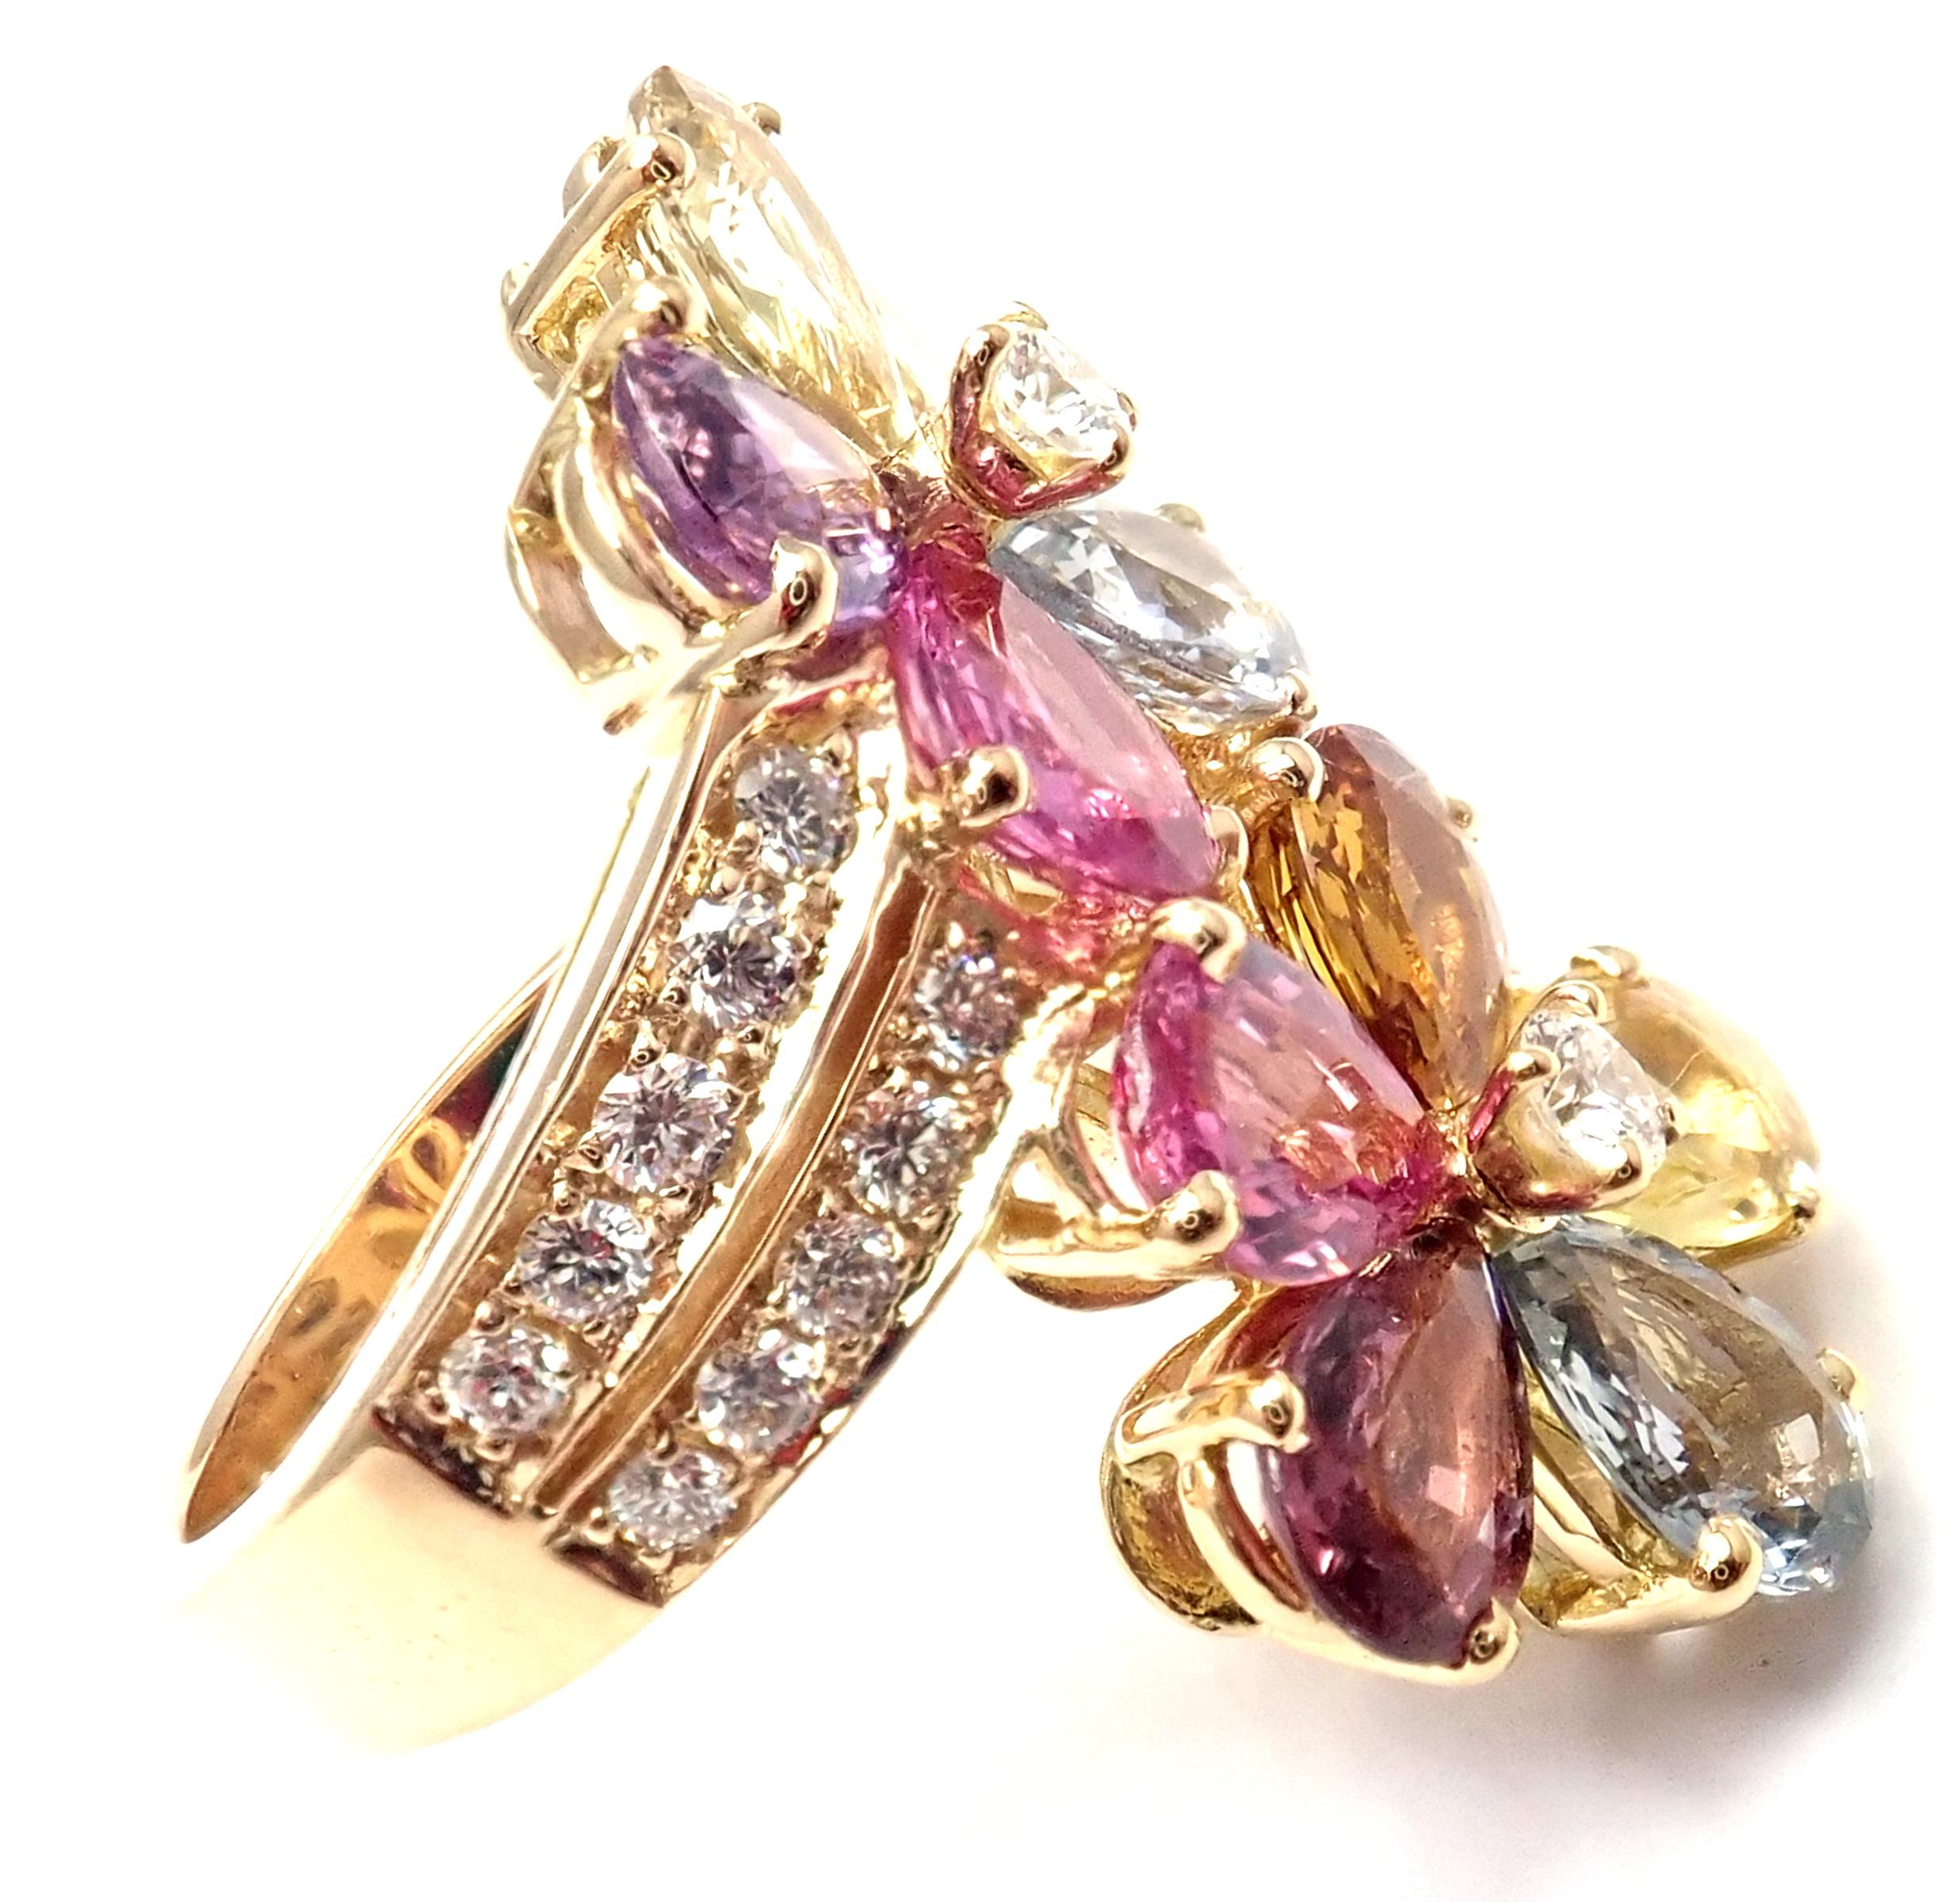 18k Yellow Gold Fancy Color Sapphire Flower Ring By Bulgari.
With 22 round brilliant cut diamonds VS1 clarity, E color total weight approx. .80ct
10 pear shape fancy color sapphires total weight approx. 9ct
This ring comes with original Bulgari